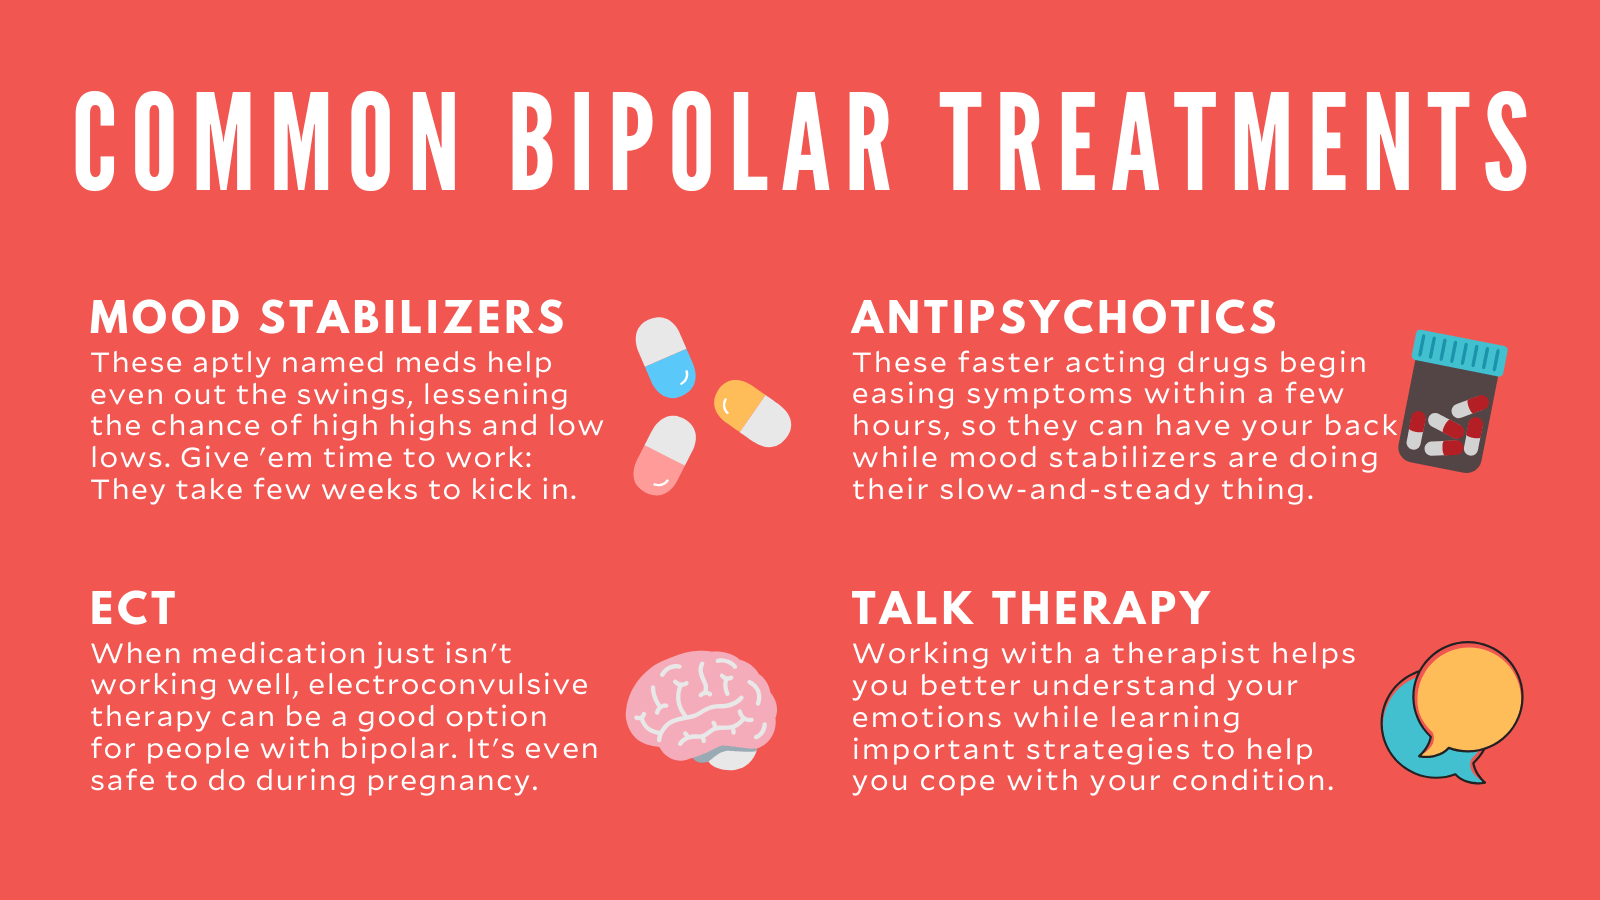 Bipolar II Disorder how it's discrete from Bipolar disorder By Pritish